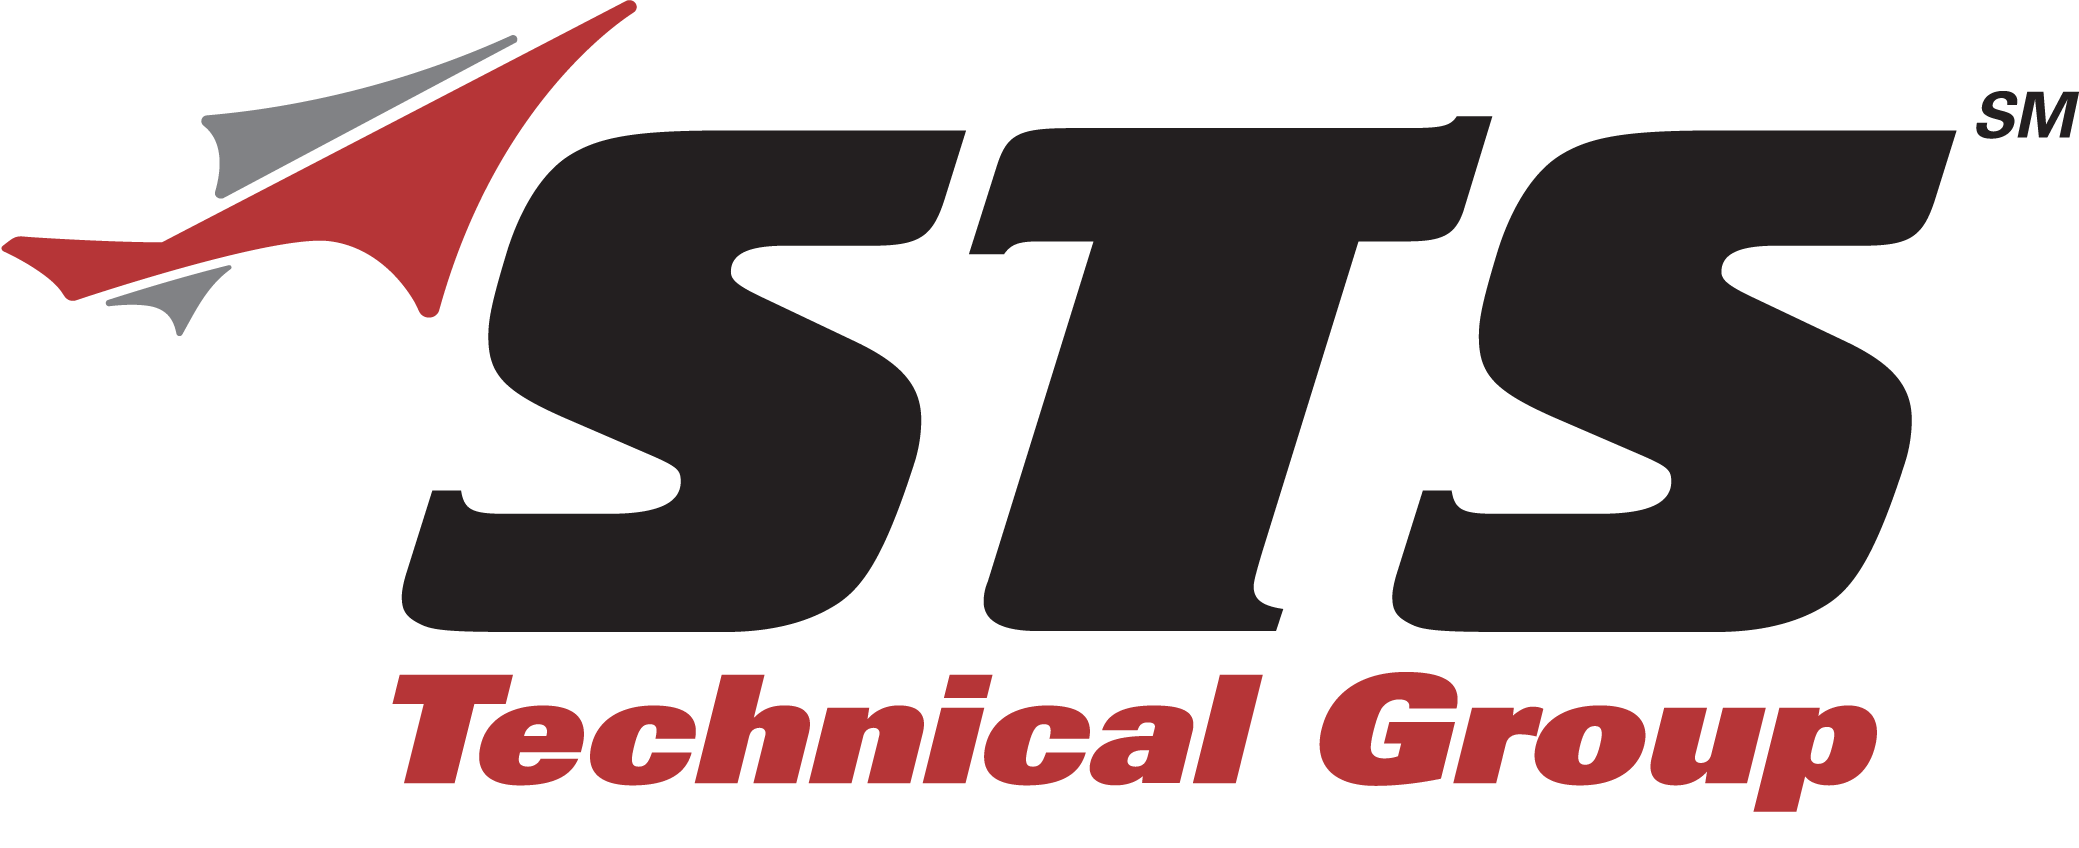 American Technical Company Logo - STS Technical Group - An STS Aviation Group Company